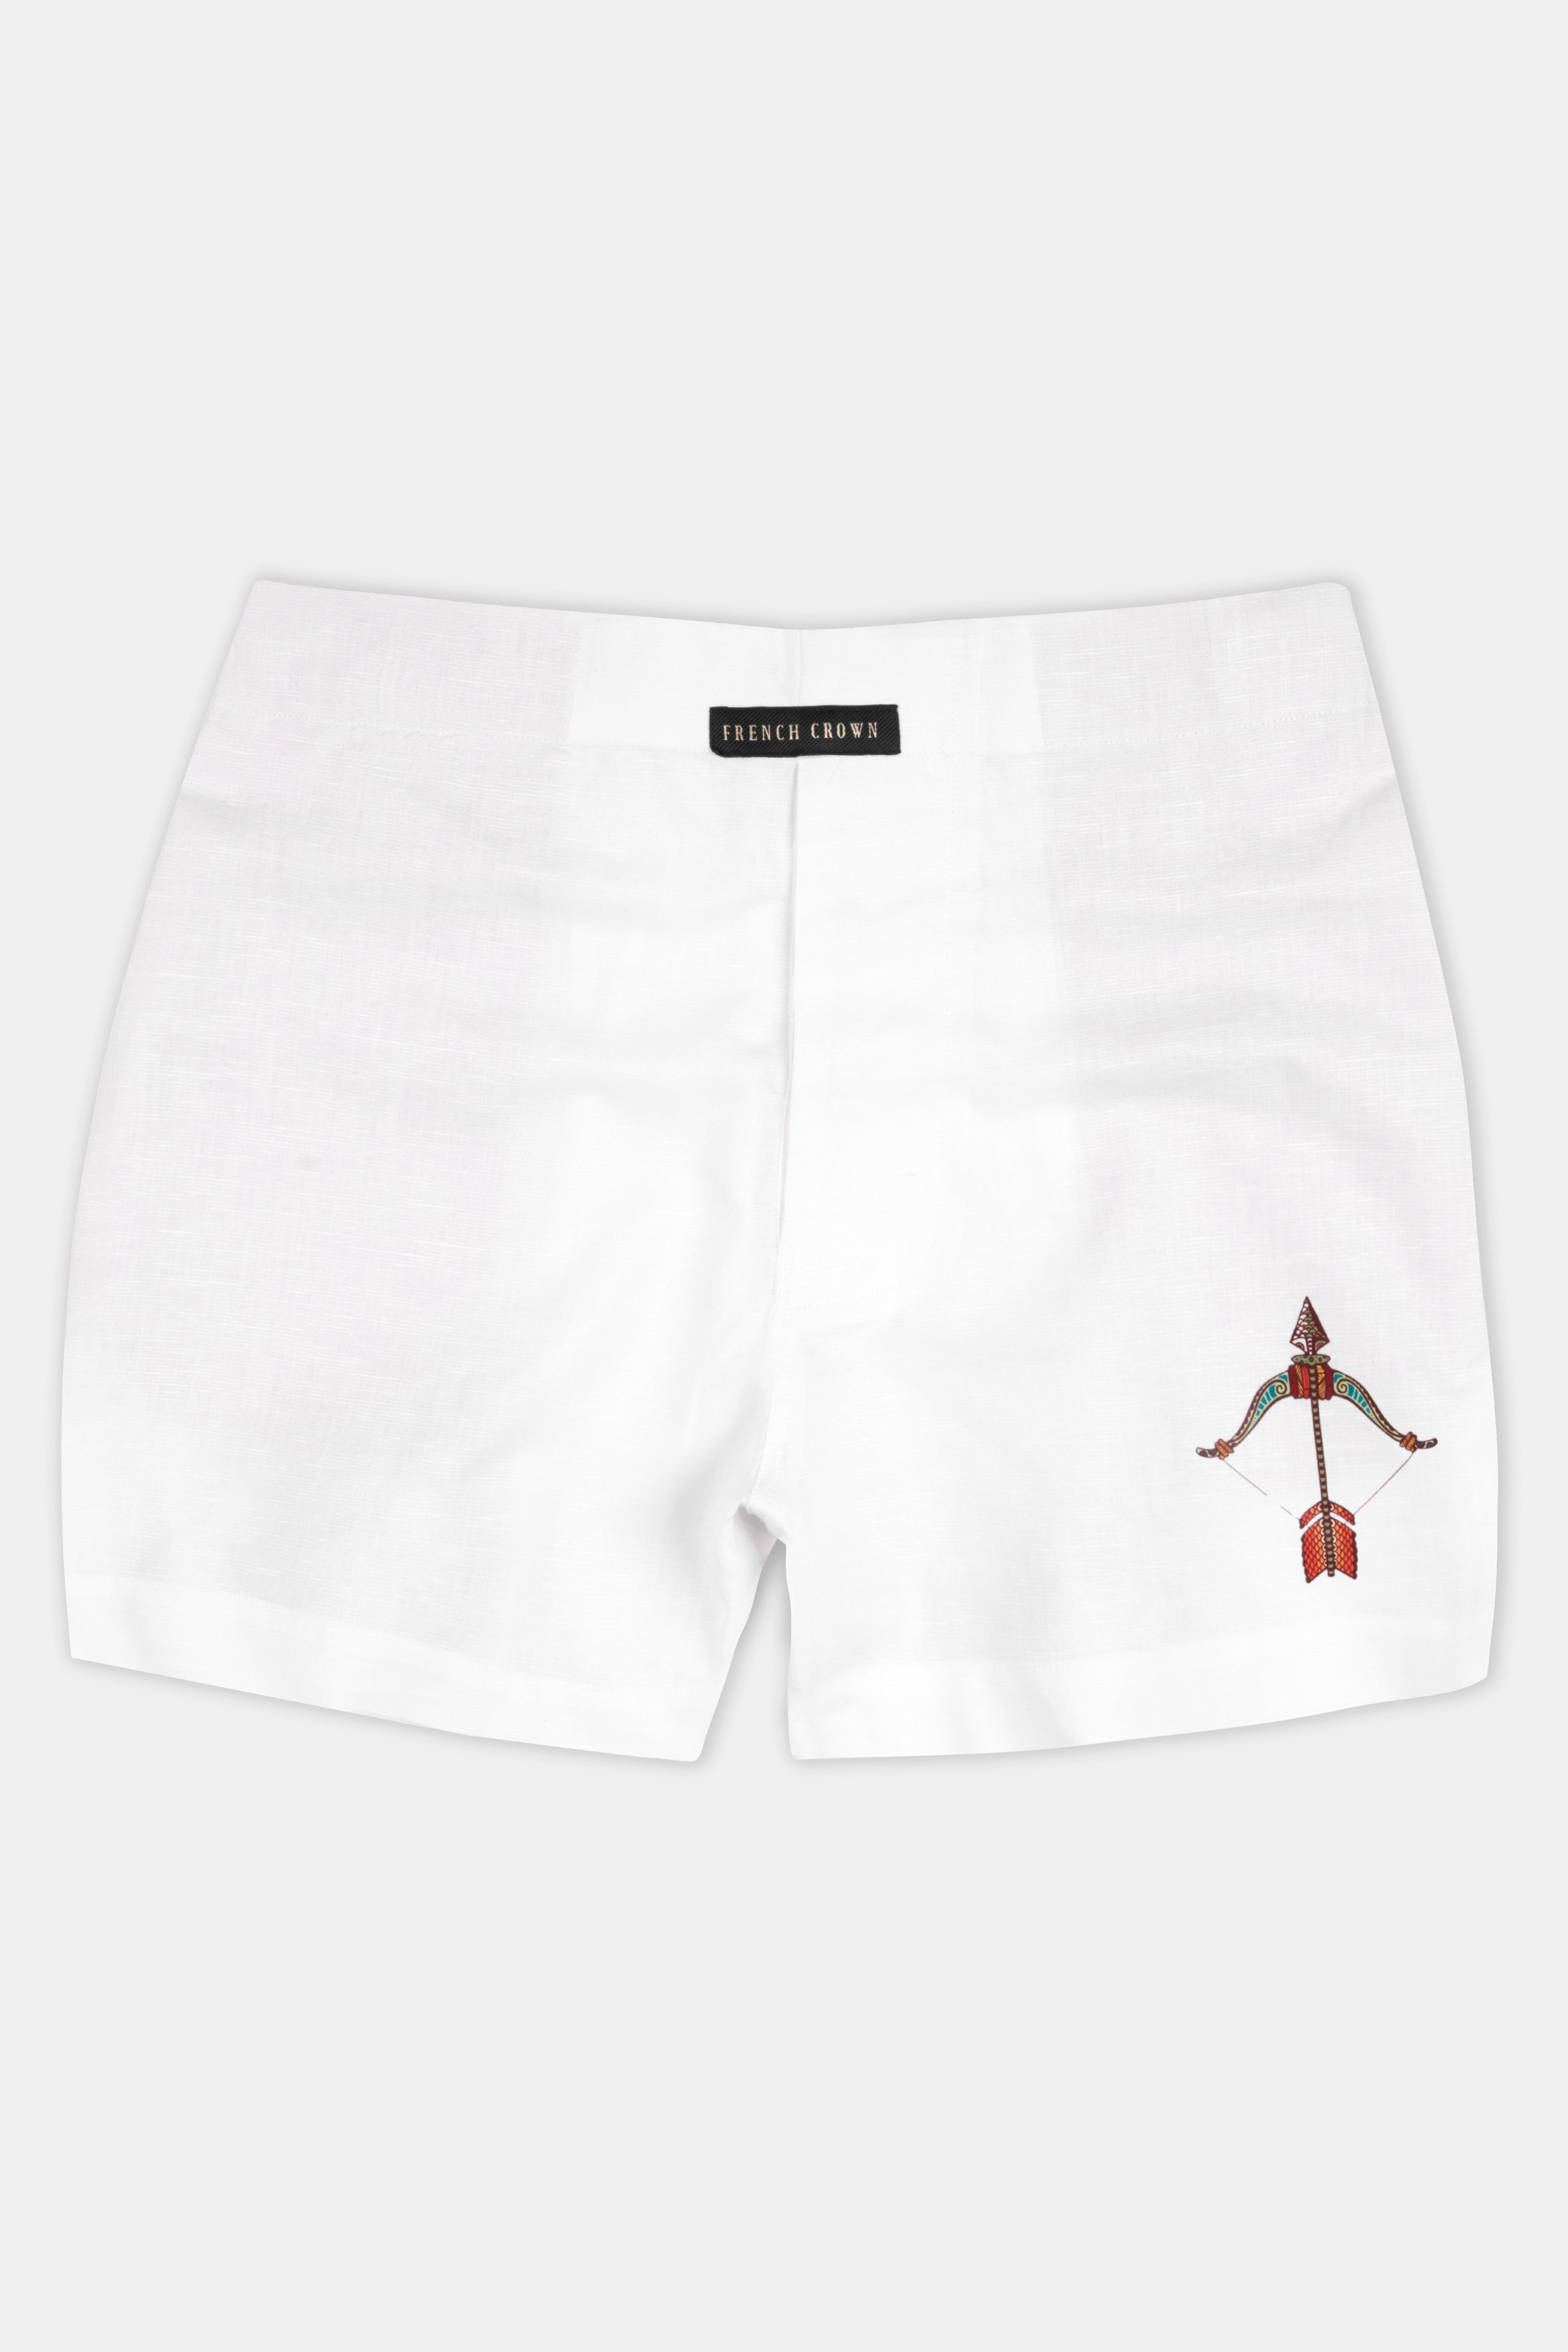 Bright White Bow and Arrow Printed Luxurious Linen Boxers BX471-RPRT103-28, BX471-RPRT103-30, BX471-RPRT103-32, BX471-RPRT103-34, BX471-RPRT103-36, BX471-RPRT103-38, BX471-RPRT103-40, BX471-RPRT103-42, BX471-RPRT103-44